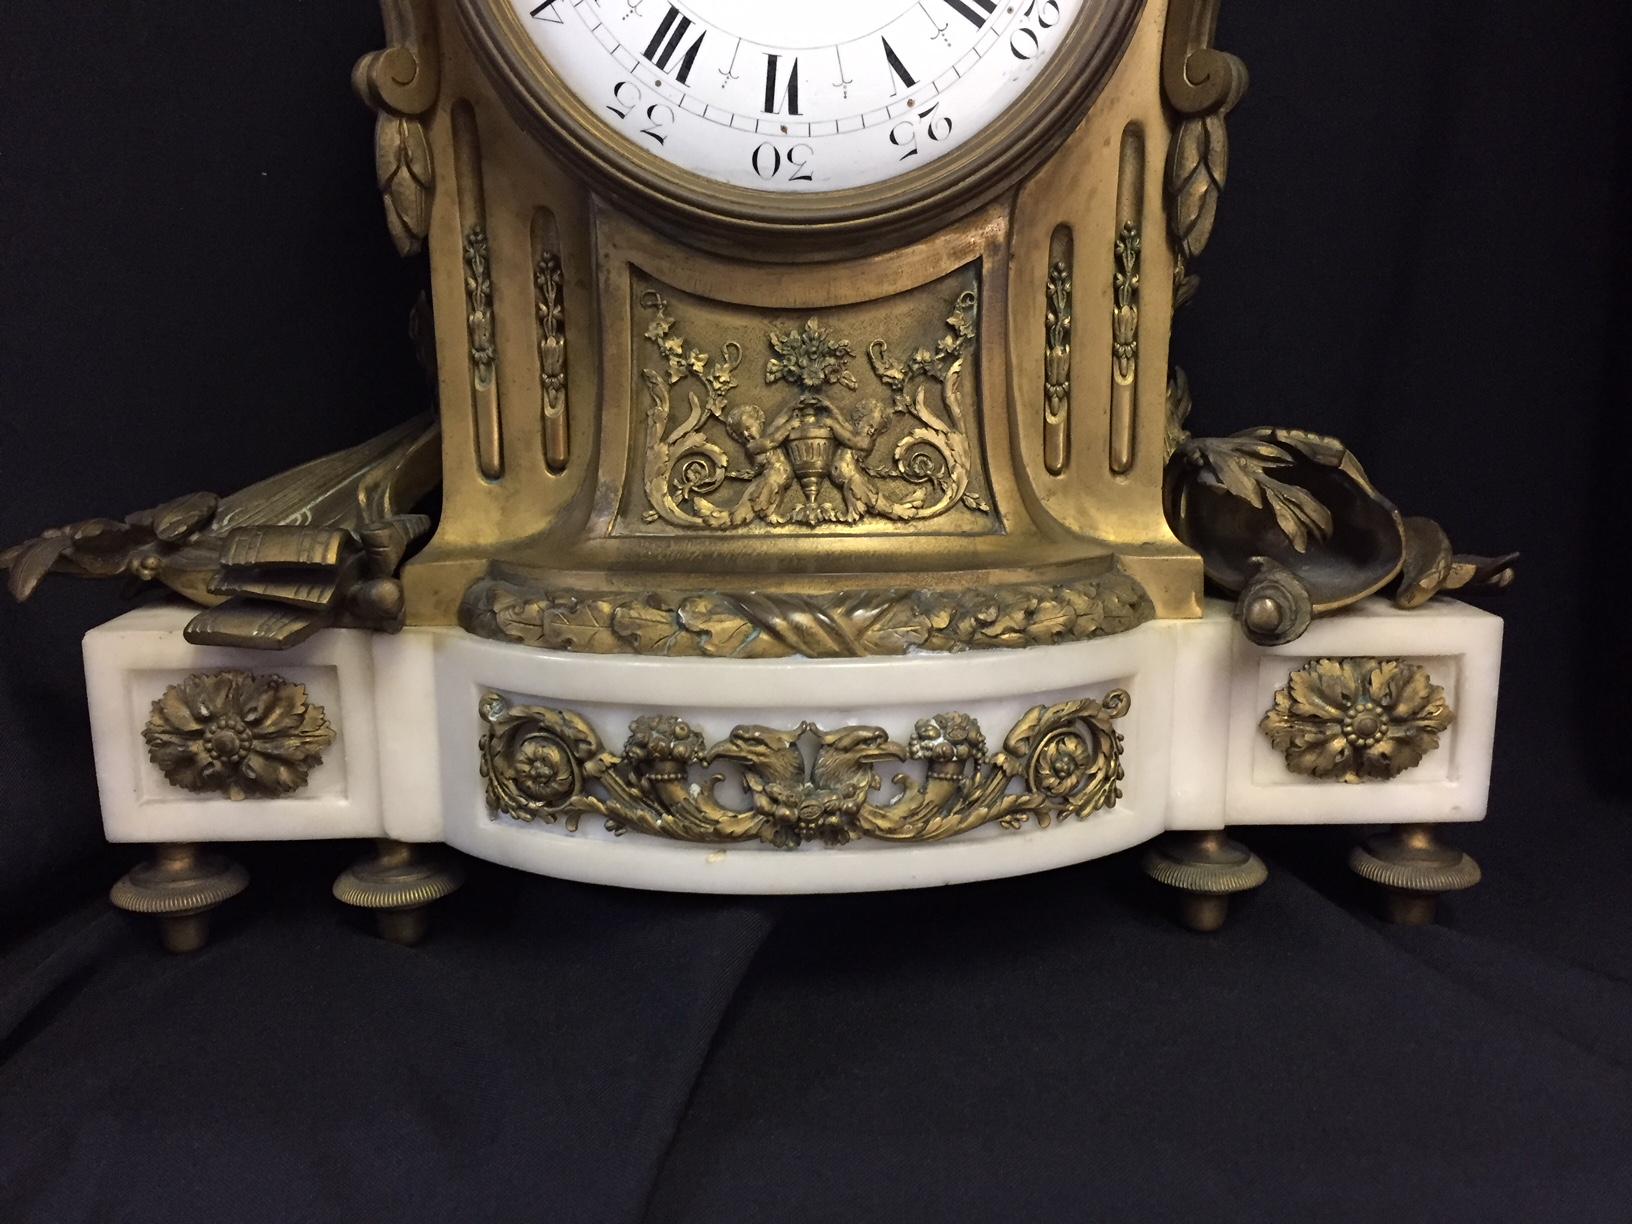 Remarkable 19th century French Louis XVI style ormolu mounted white marble clock with love birds.
Retailed by Tiffany. 

The clock is surmounted with two kissing love birds among foliage and floral garlands intertwined with a flaming torch, over